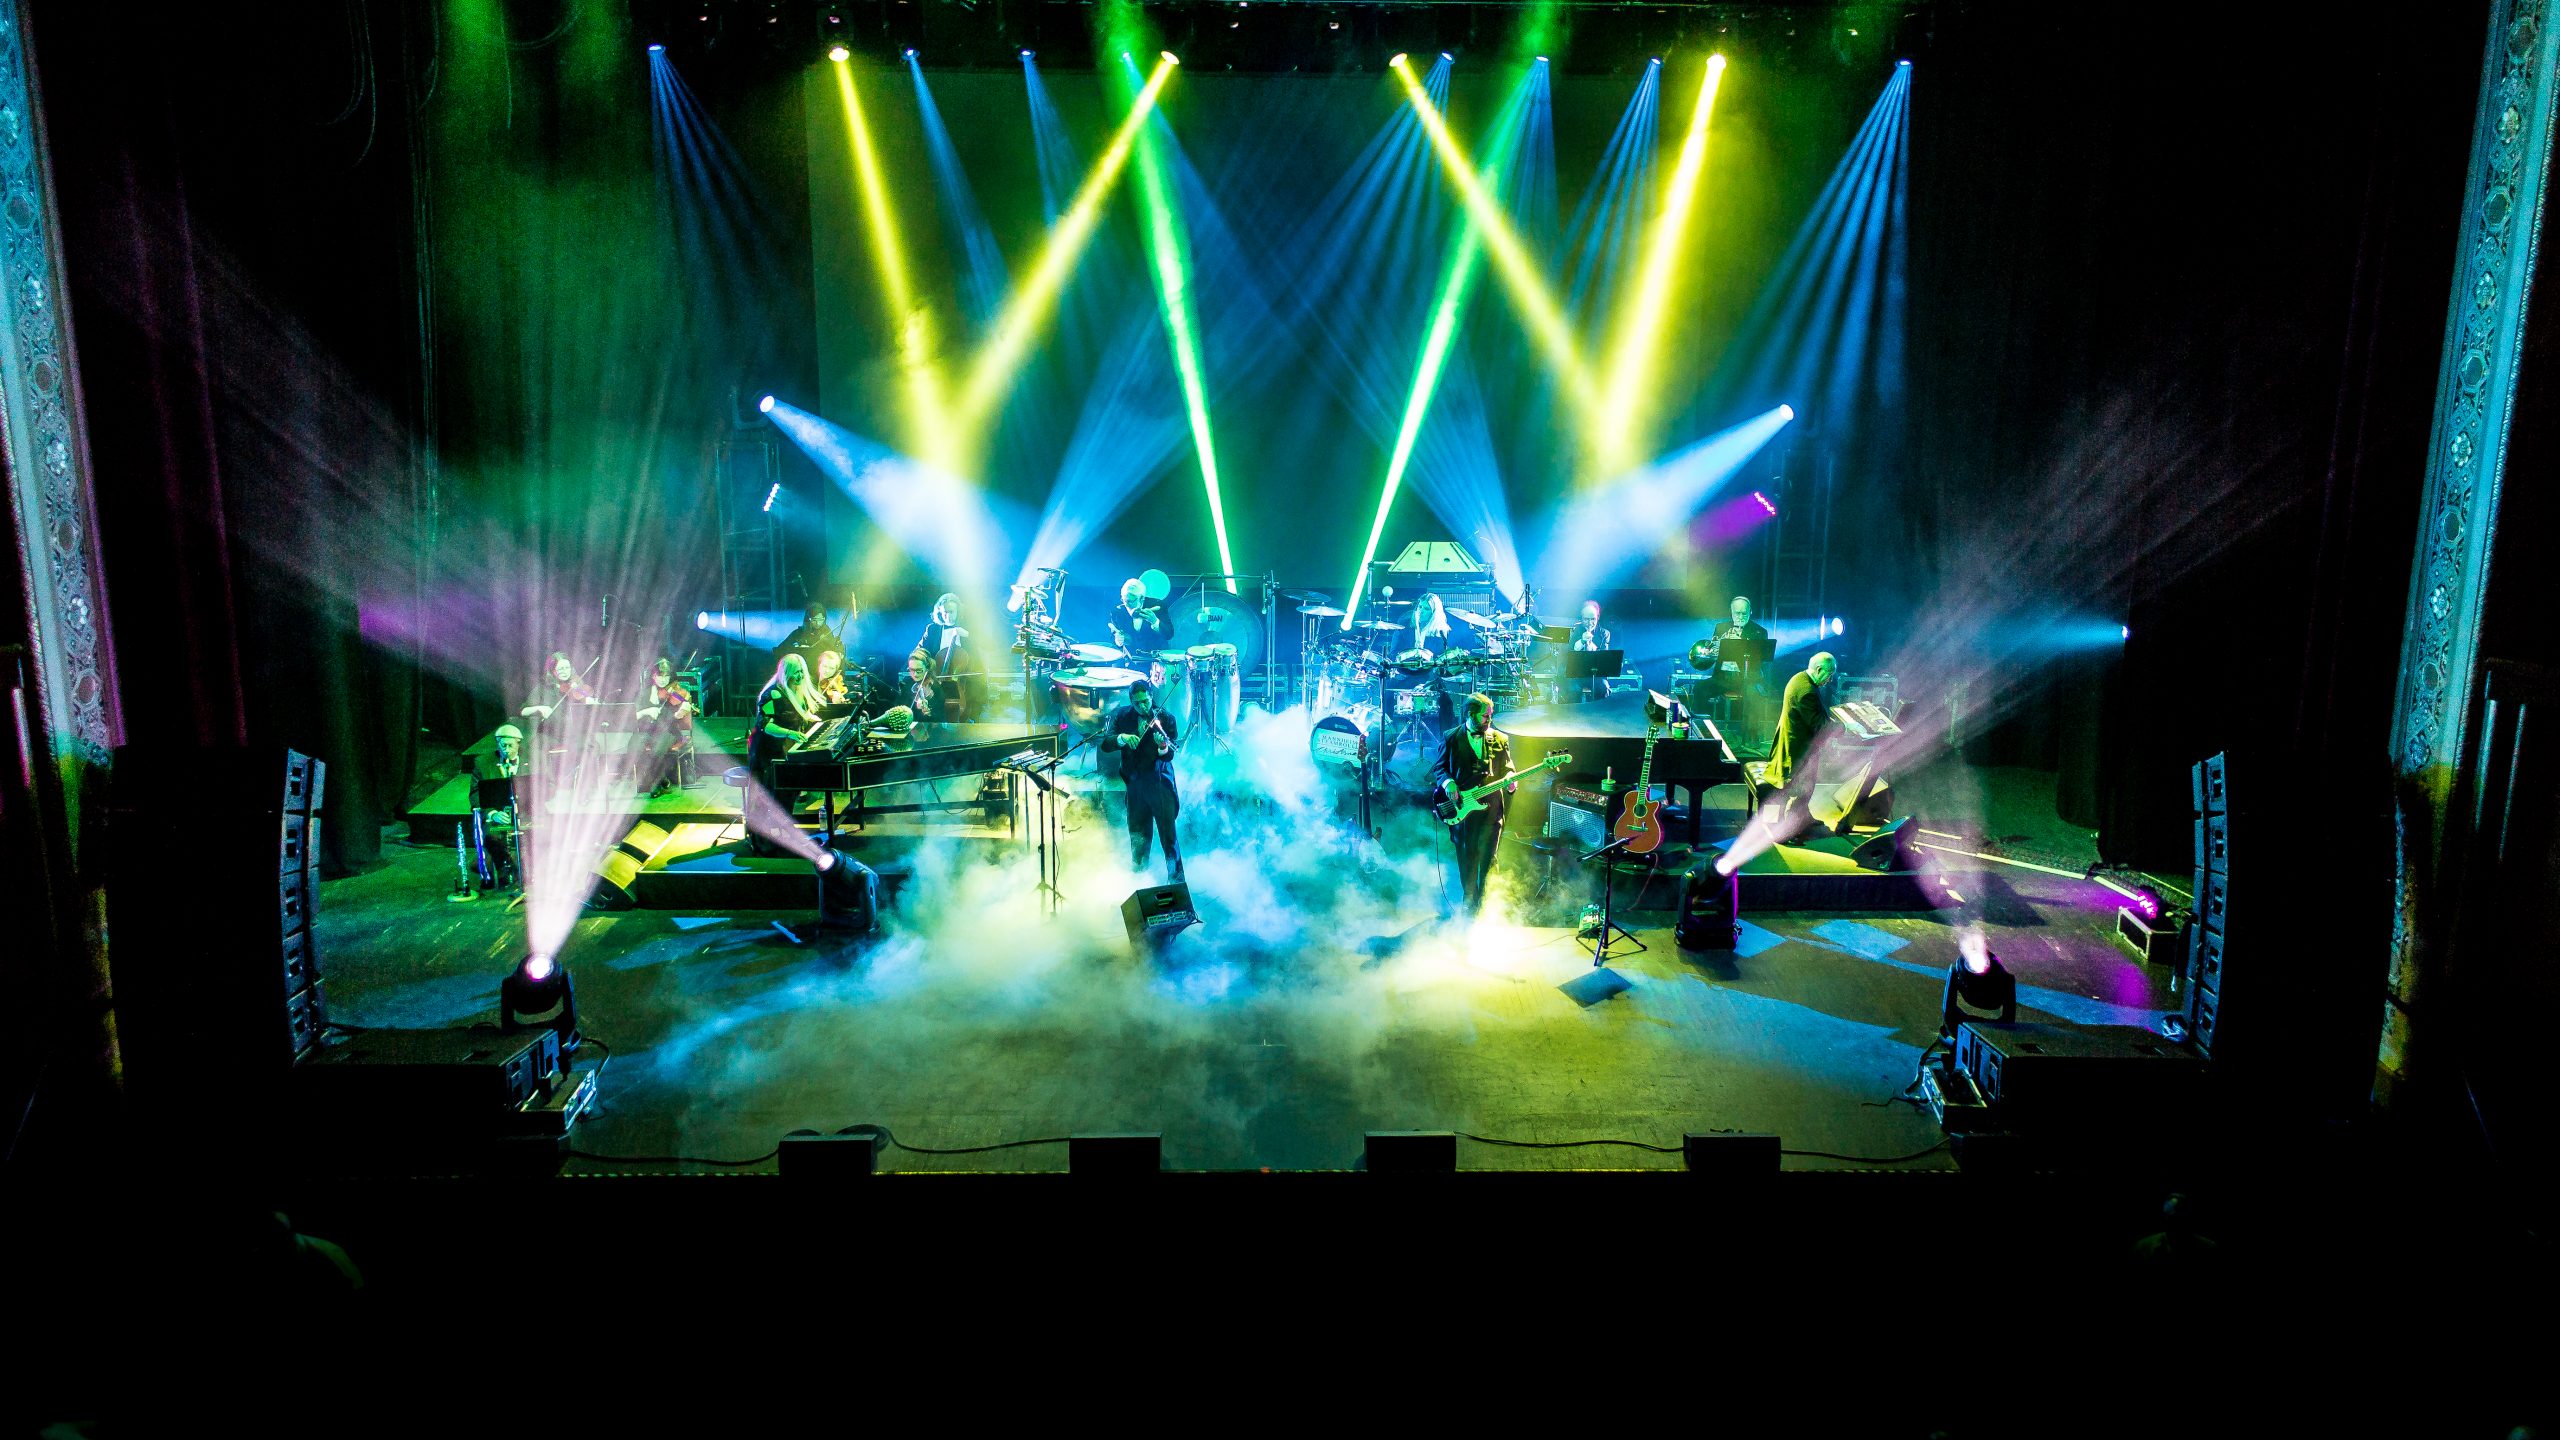 Mannheim Steamroller – Top-Selling Christmas Artist of All Time – To Perform at The Stanley Theatre in December